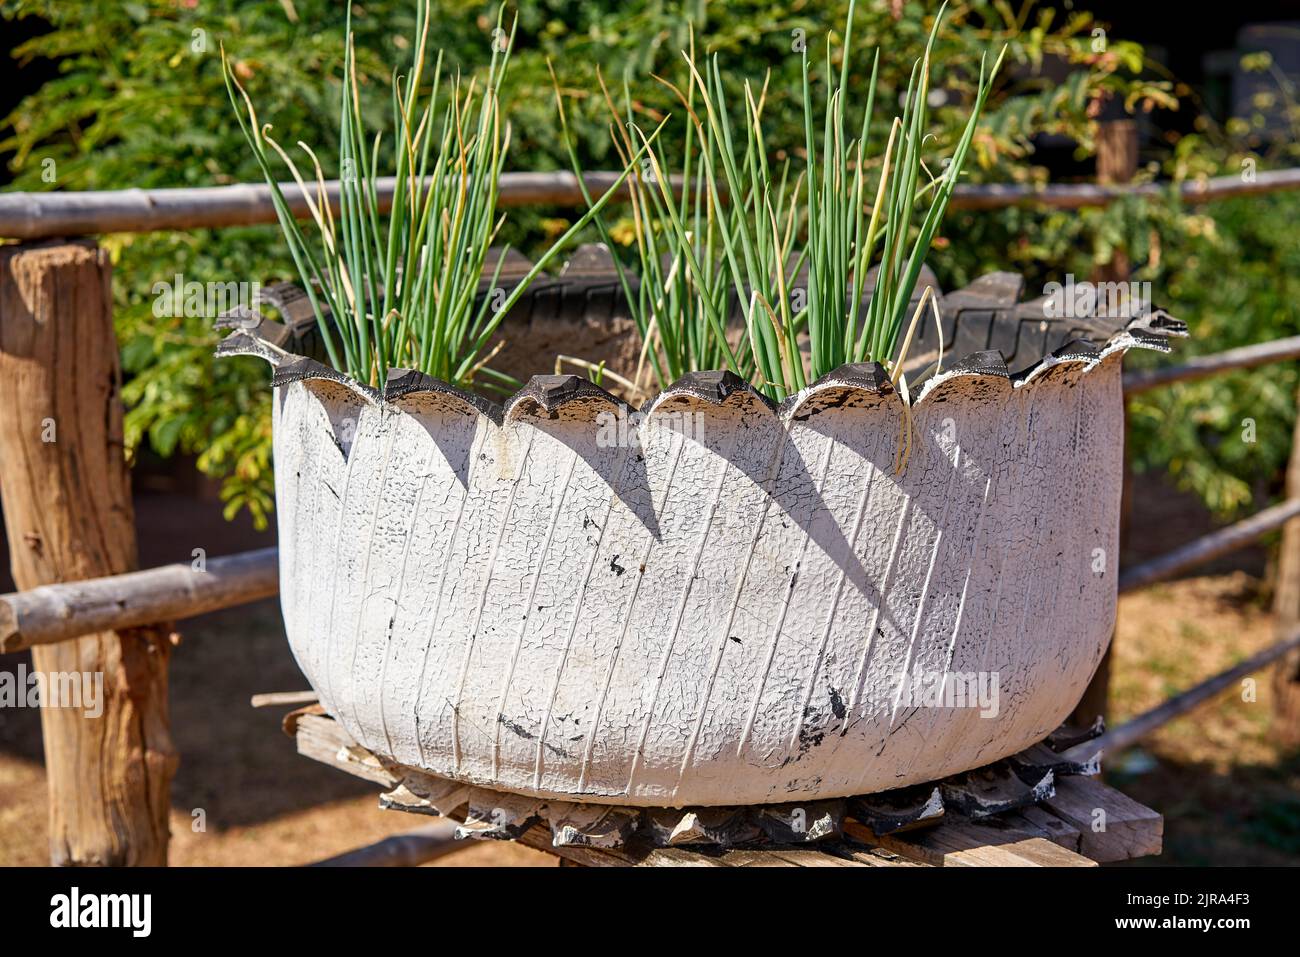 A greta use for recycled rubber tires, used to grow vegetables and herbs in. Stock Photo